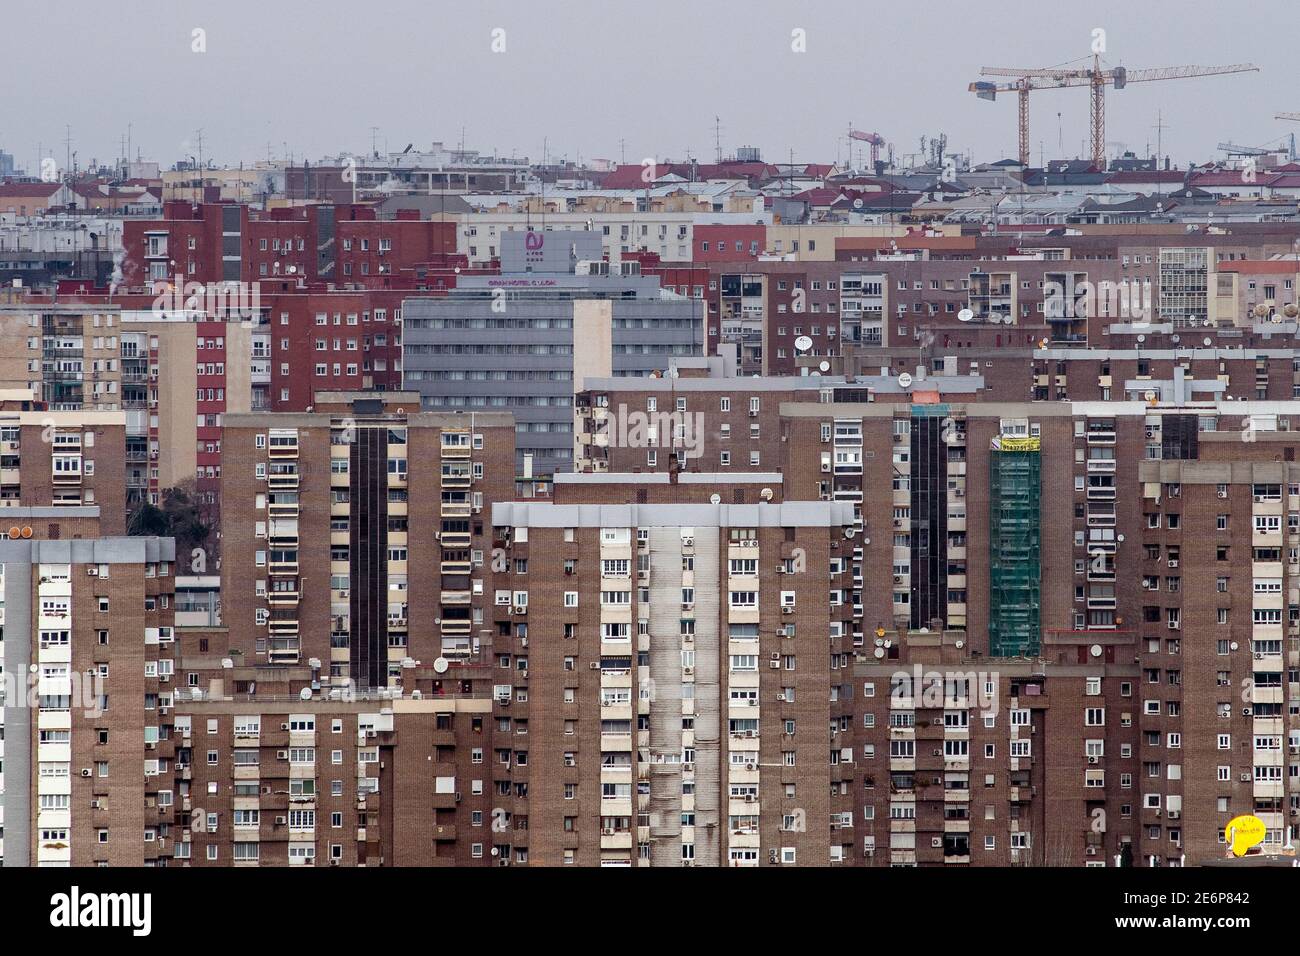 Madrid, Spain. 29th Jan, 2021. View of a residential area in Madrid. One out of three households in the city of Madrid have been impoverished over 2020 due to the coronavirus (COVID-19) crisis, according to a report on the impact of the pandemic on the well-being of the families of Madrid presented today by the vice mayor, Begoña Villacis, with the delegate of Families, Equality and Social Welfare, Pepe Aniorte. Credit: Marcos del Mazo/Alamy Live News Stock Photo